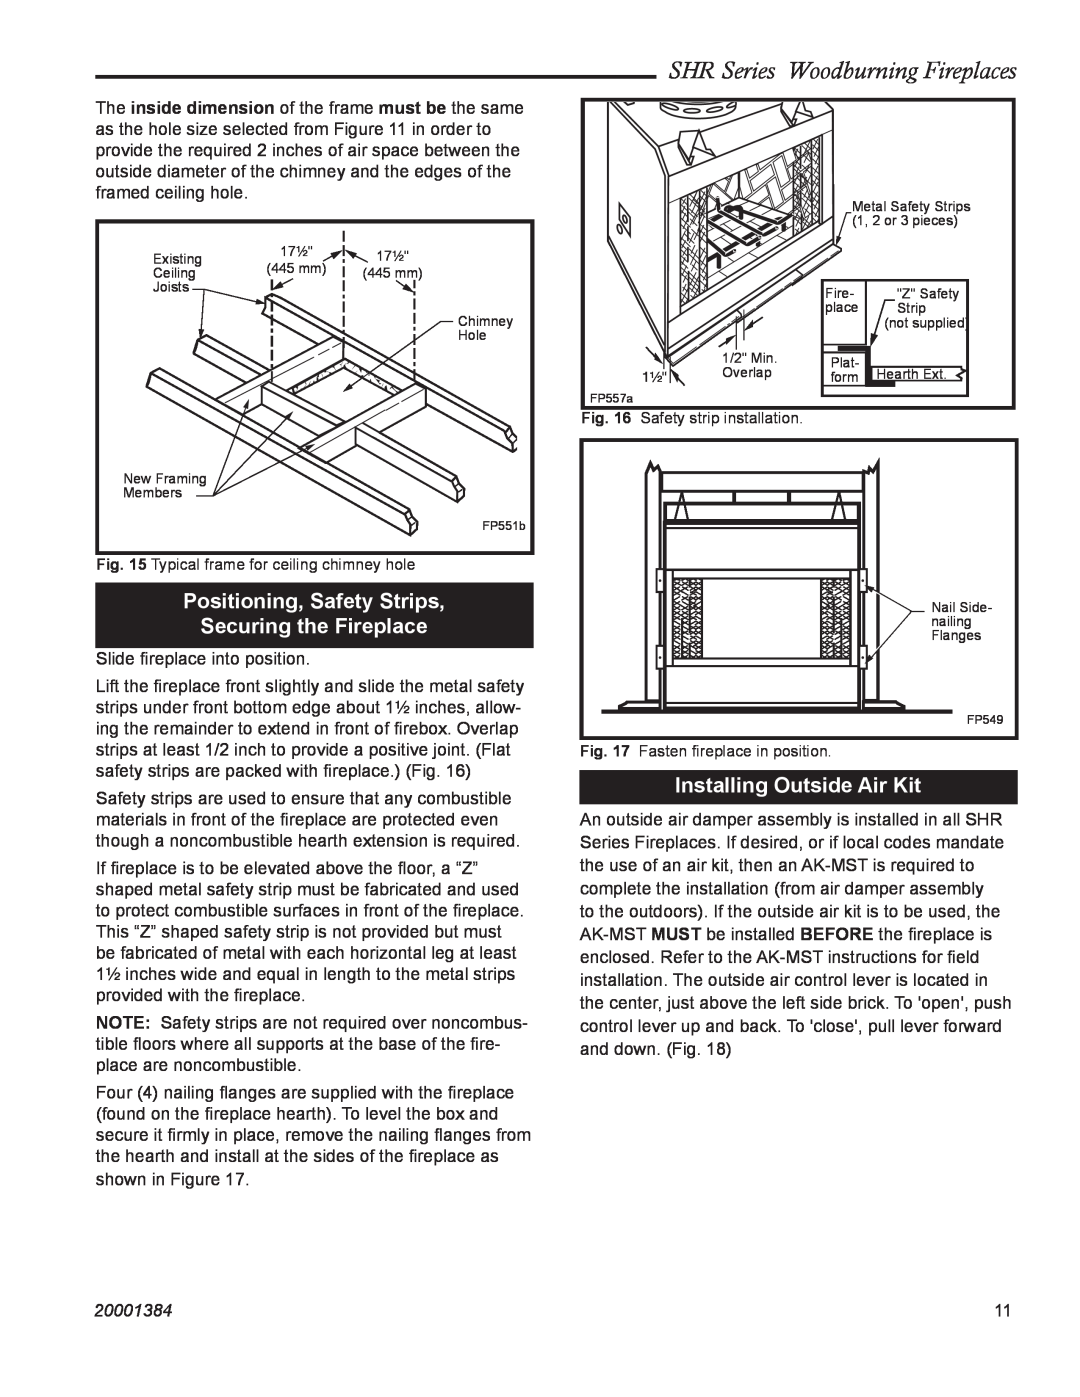 CFM Corporation SHR36, SHR52, SHR48 Positioning, Safety Strips Securing the Fireplace, Installing Outside Air Kit, 20001384 